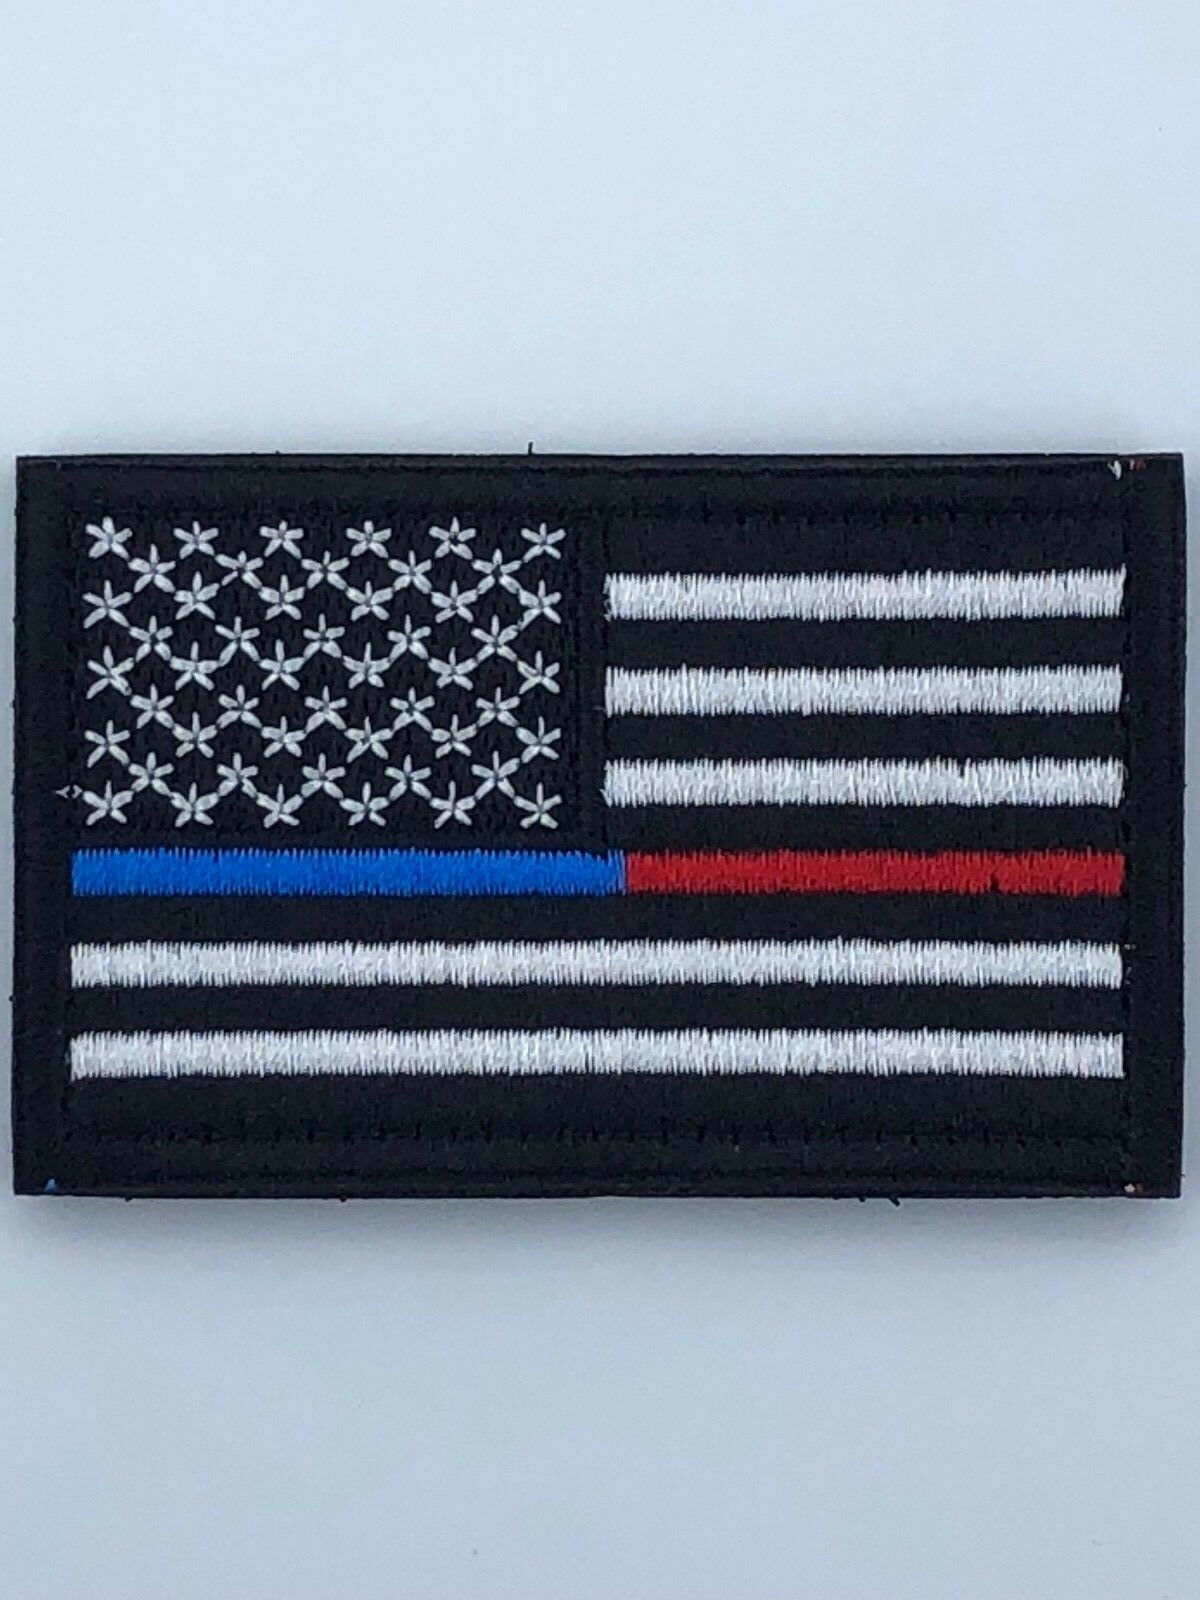 USA American Flag Patch 3”X 2” Tactical VELCRO Military Patch-Left Side